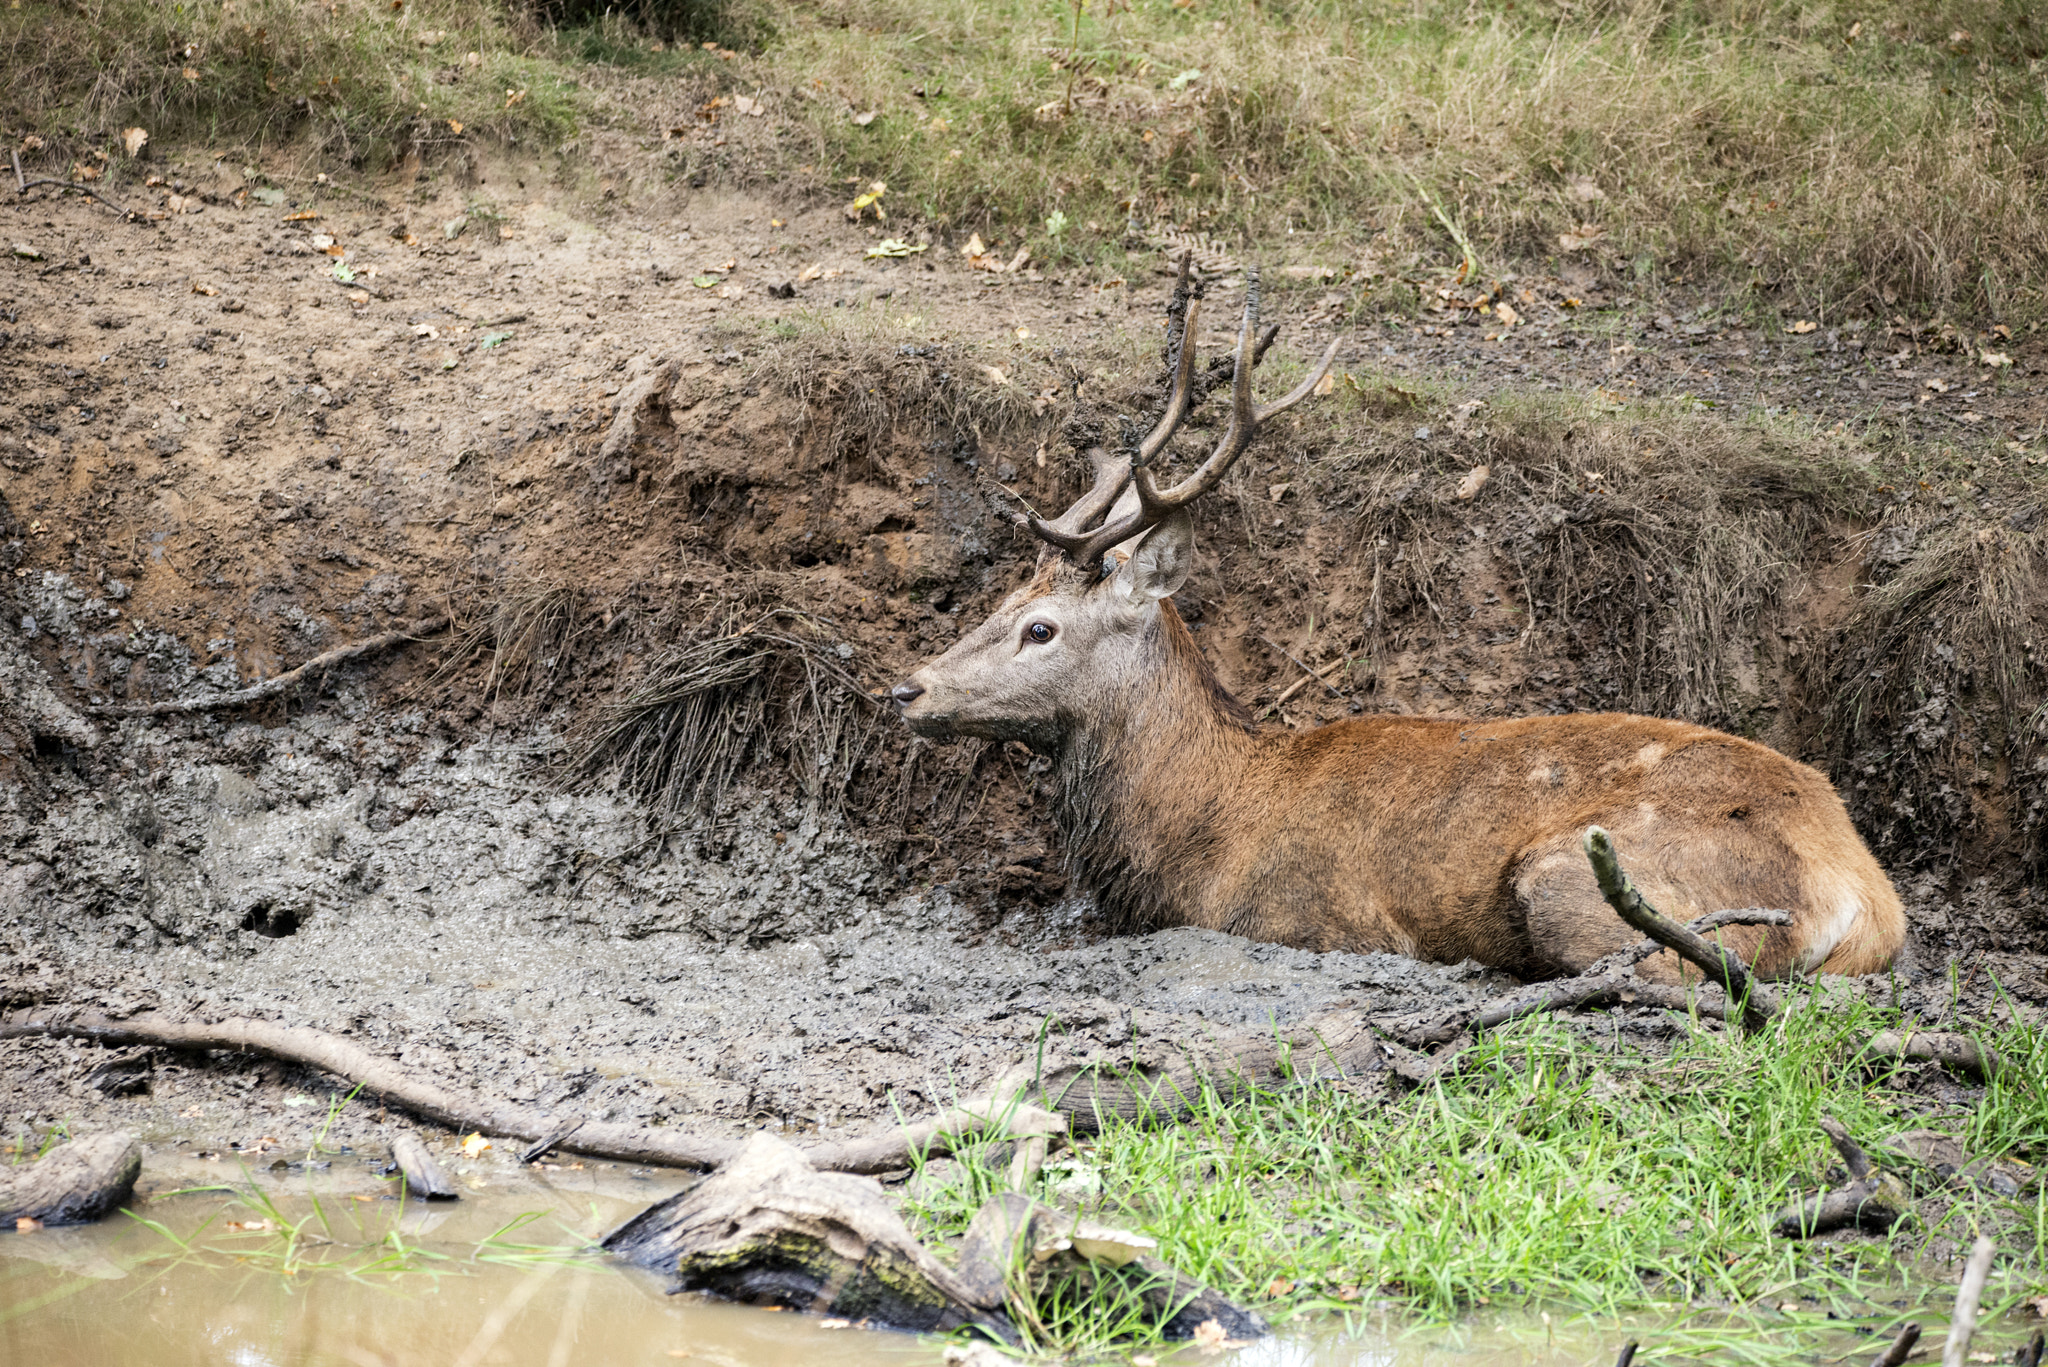 Nikon D800 + Sigma 150-600mm F5-6.3 DG OS HSM | C sample photo. Red deer stag cervus elaphus takes a mudbath to cool down on aut photography